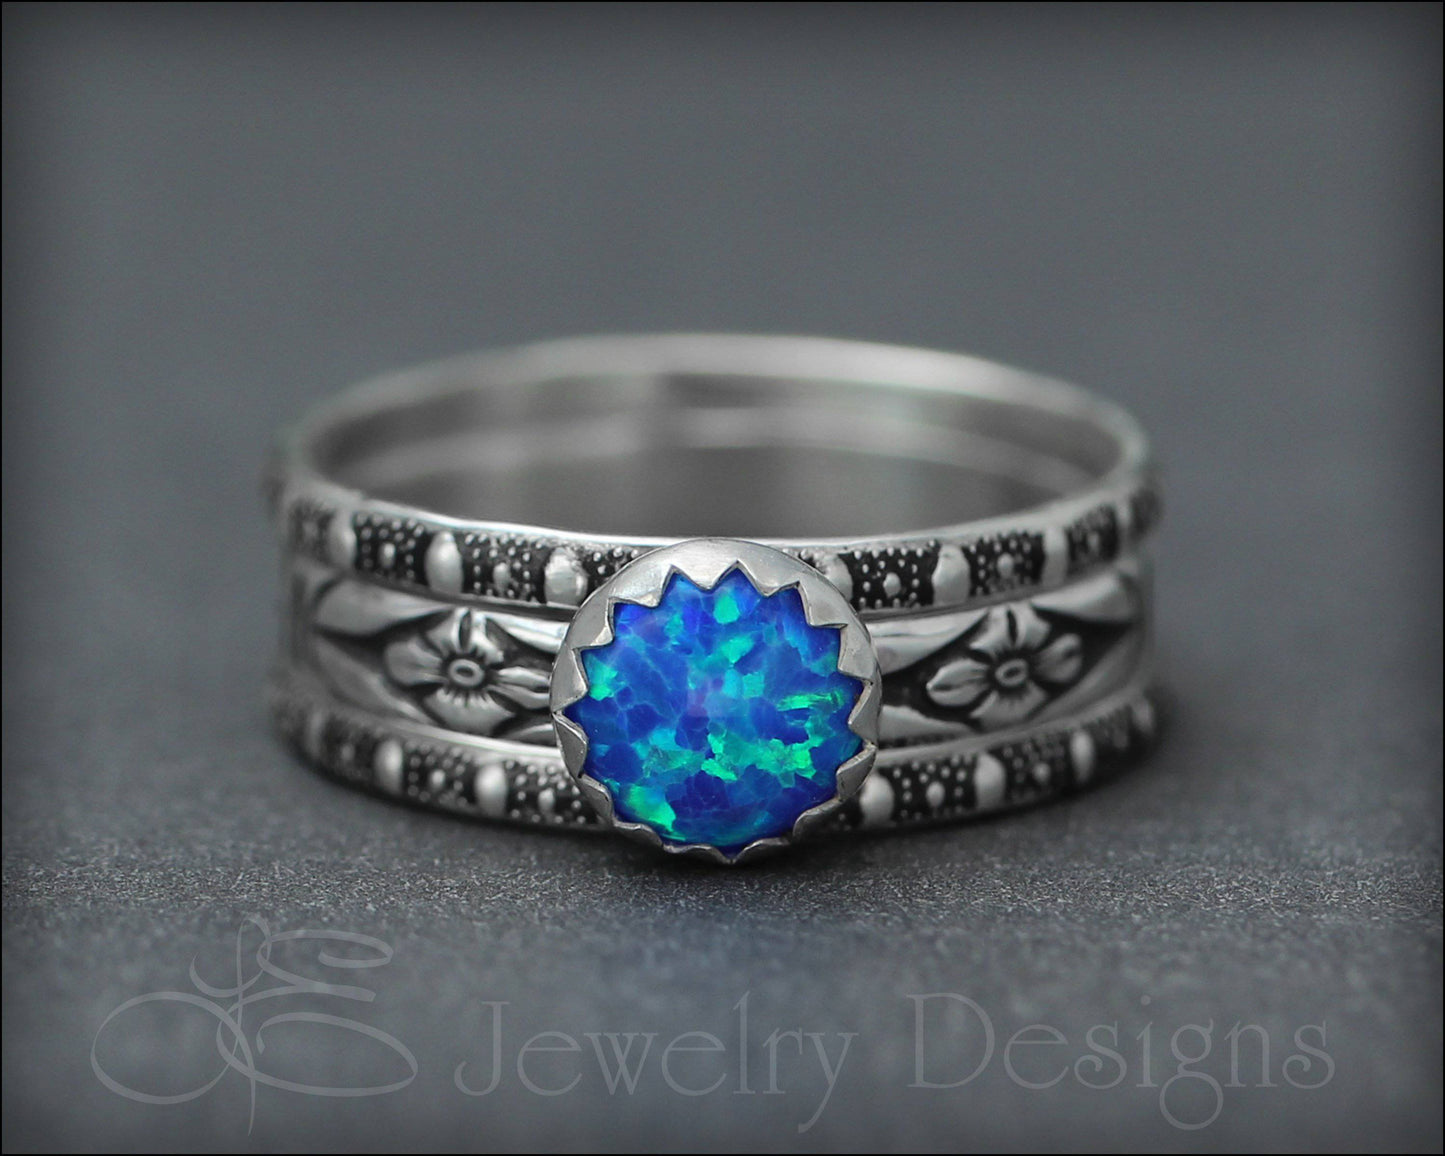 Load image into Gallery viewer, Floral Opal Ring Set (6mm opal) - LE Jewelry Designs
